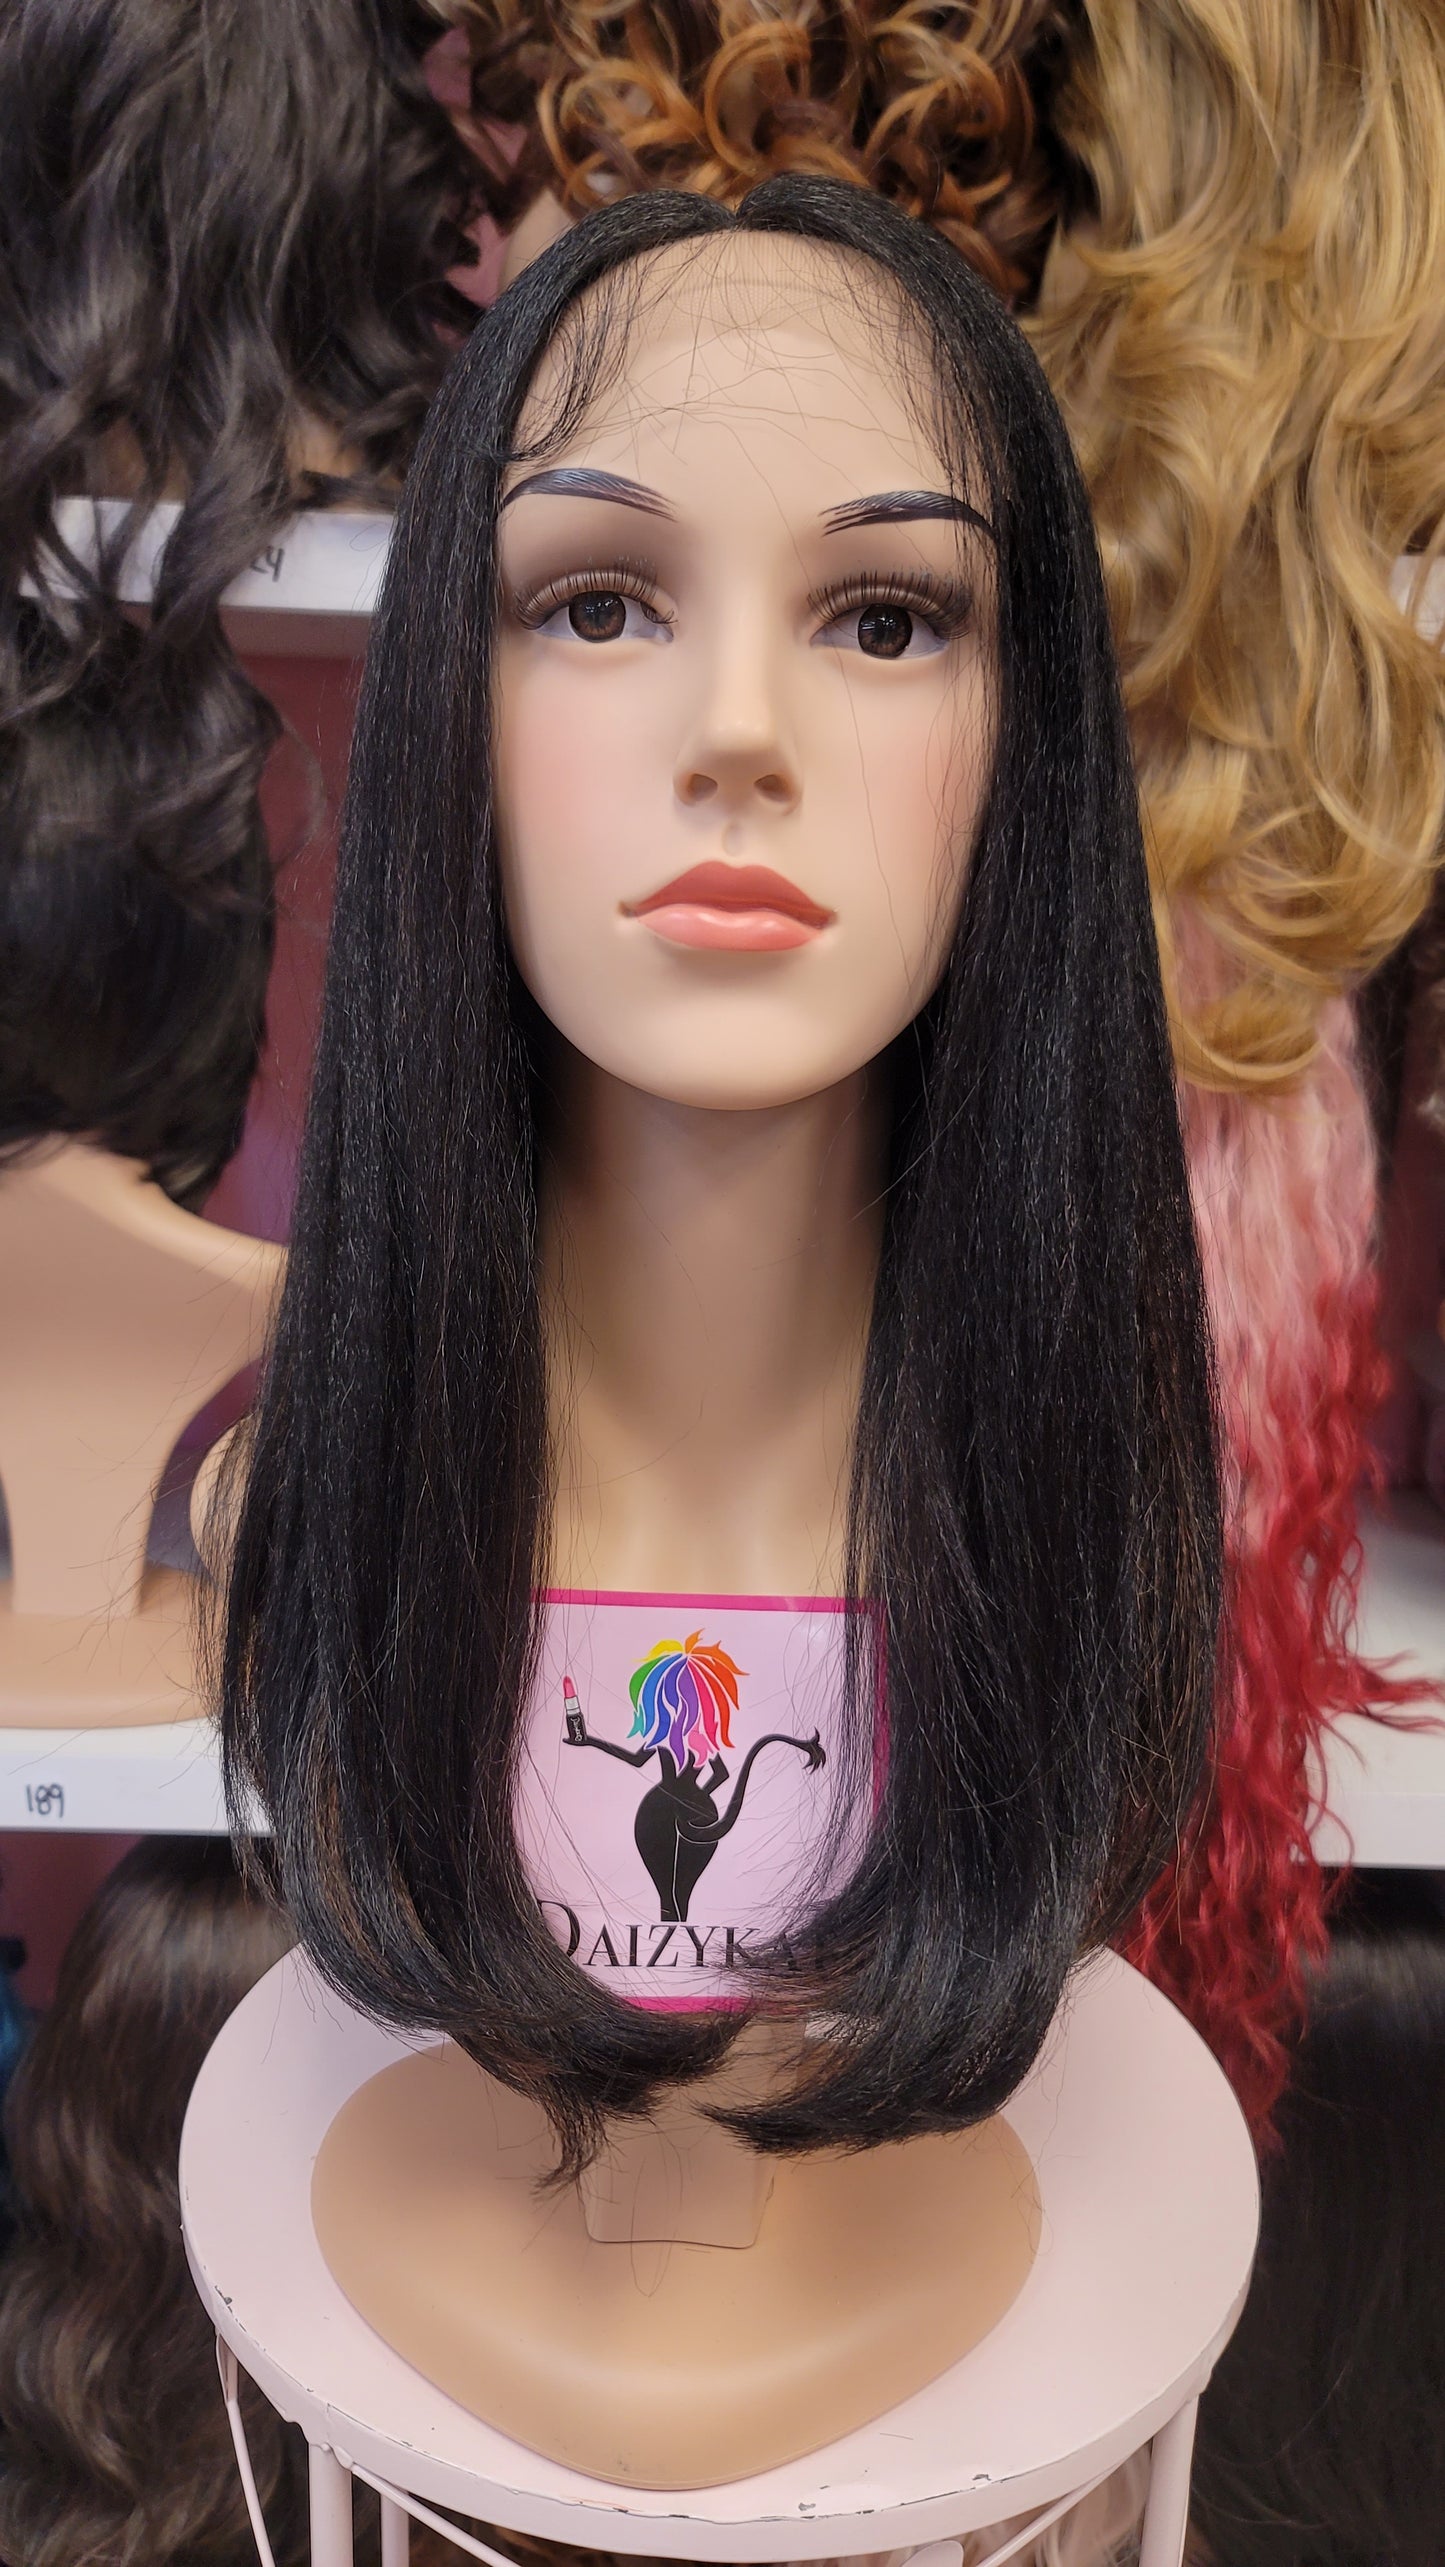 469 Sandra - Middle Part Lace Front Wig Human Hair Blend- 1B/30 - DaizyKat Cosmetics 469 Sandra - Middle Part Lace Front Wig Human Hair Blend- 1B/30 DaizyKat Cosmetics Wigs